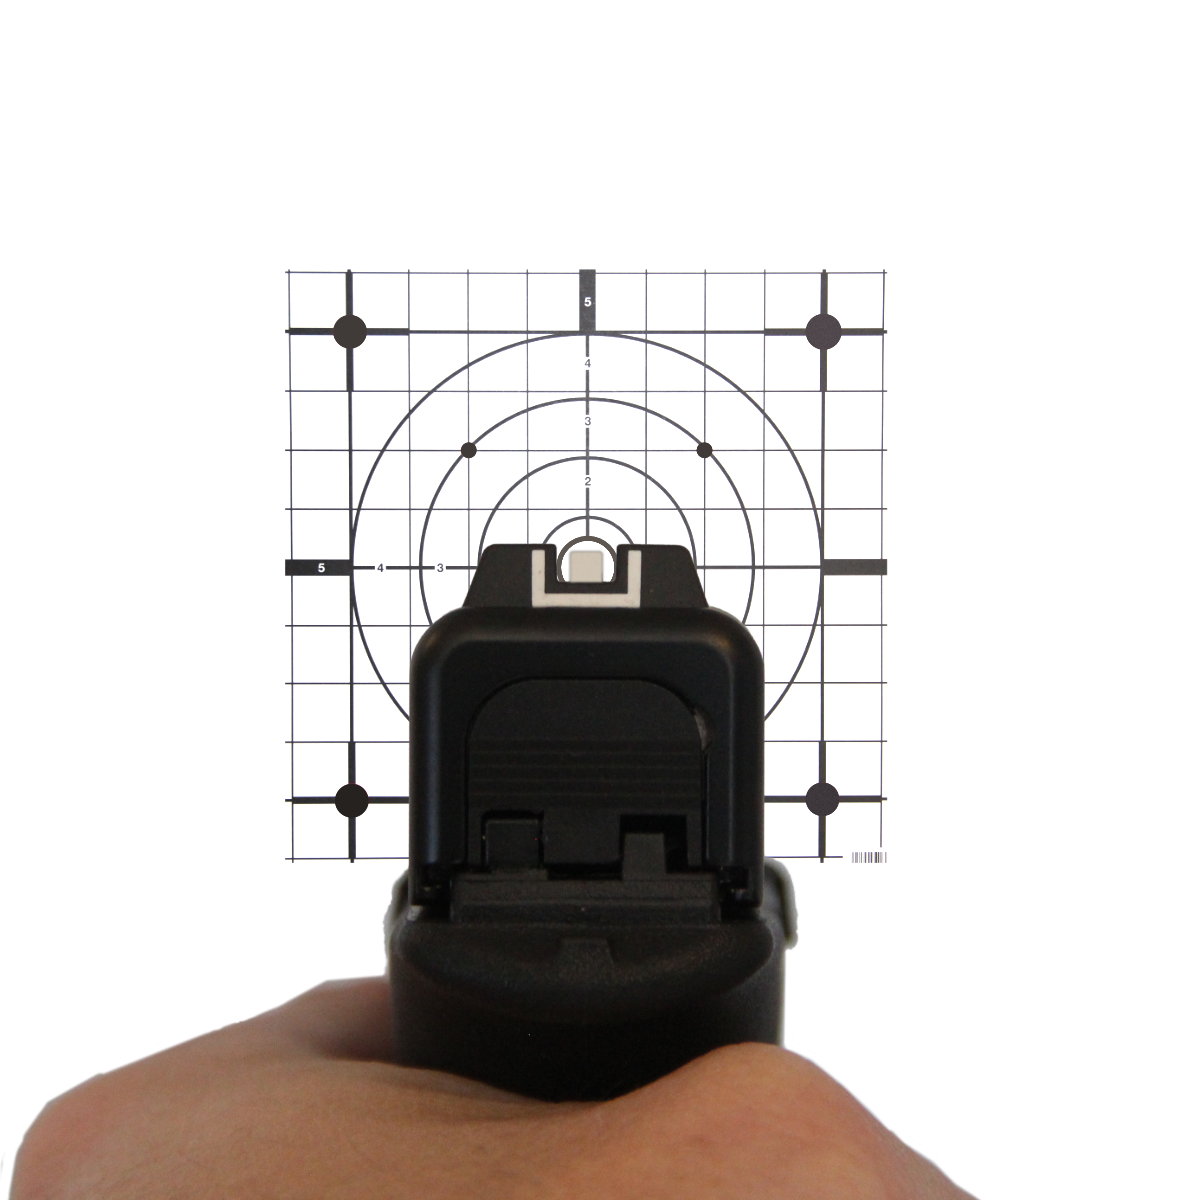 White Glock Sights on White Paper Shooting Target